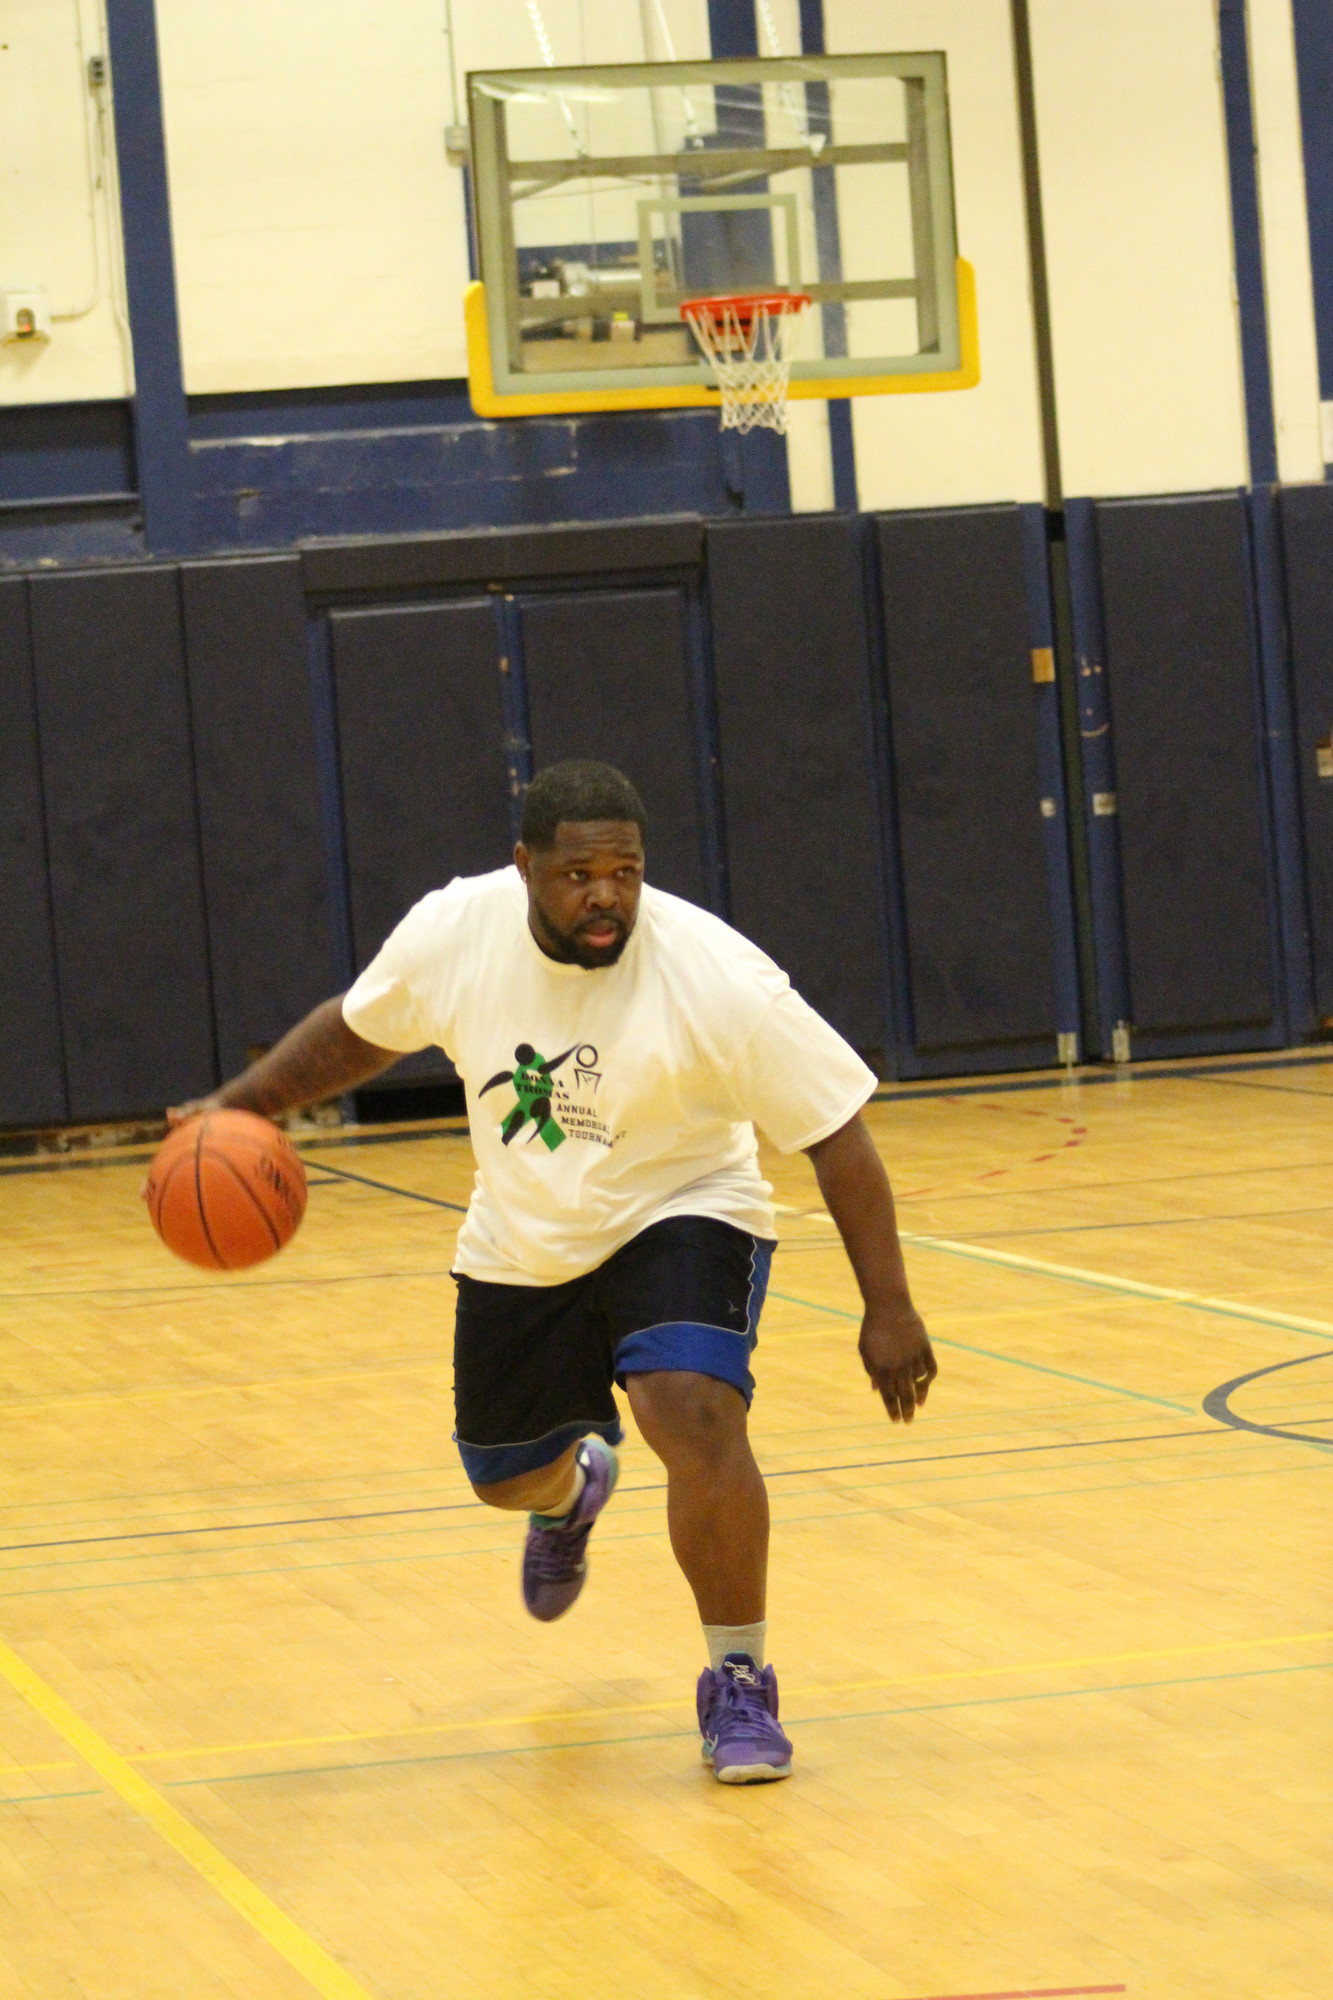 Quentin Brown was one of about 40 people who played in the tournament.